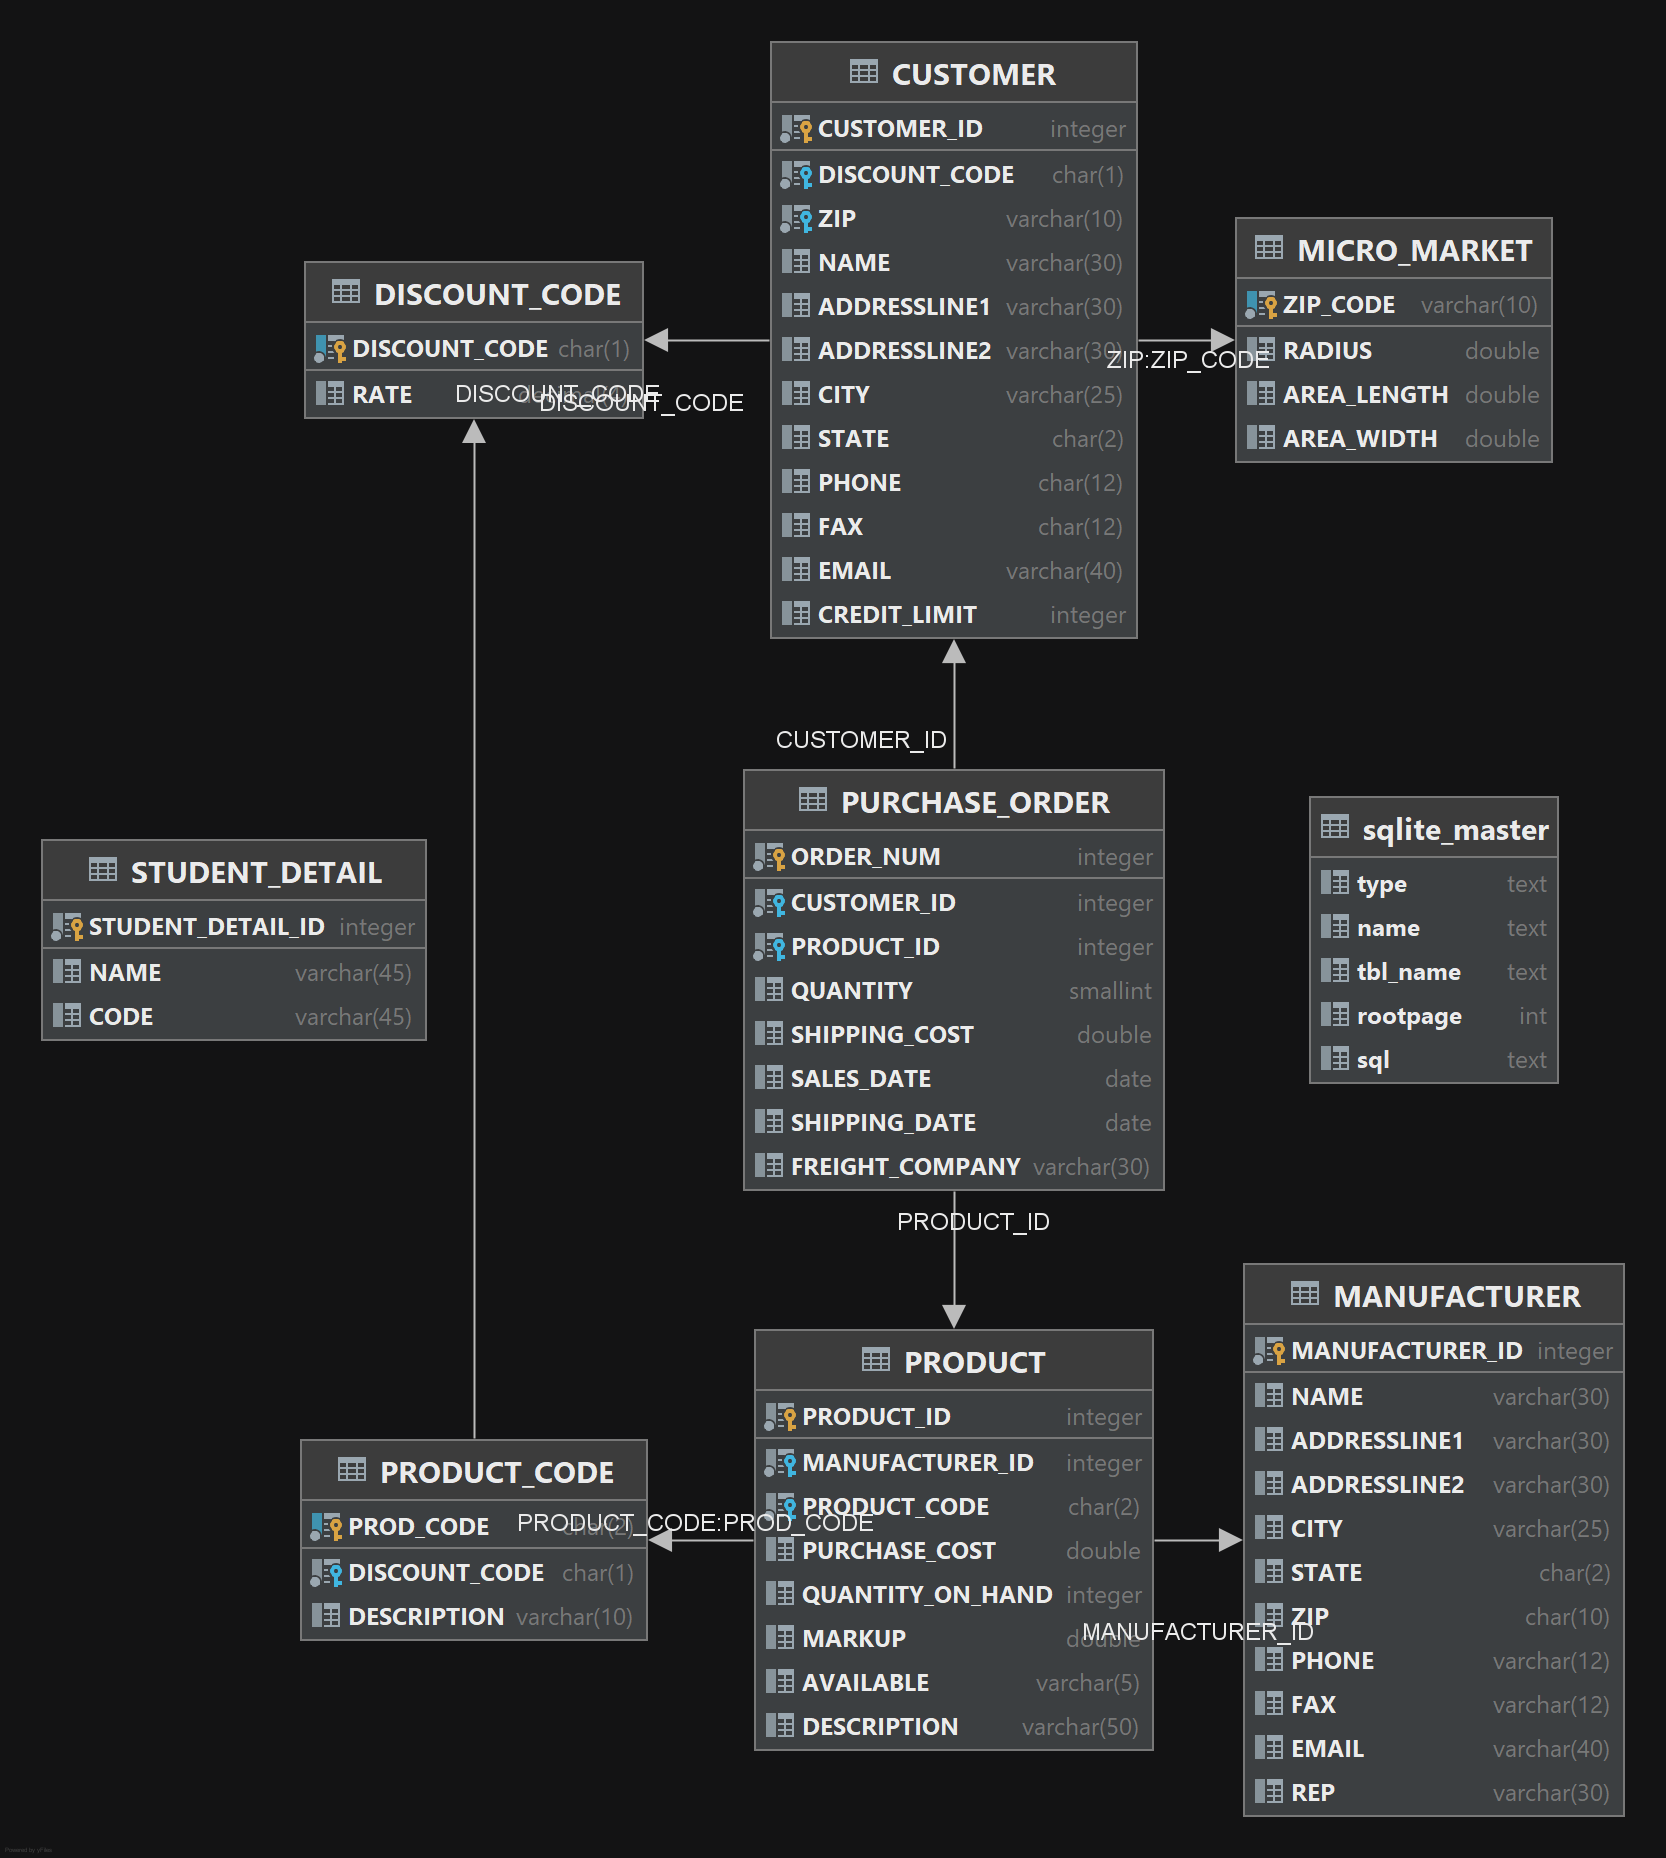 Database overview 1 (made with PyCharm)